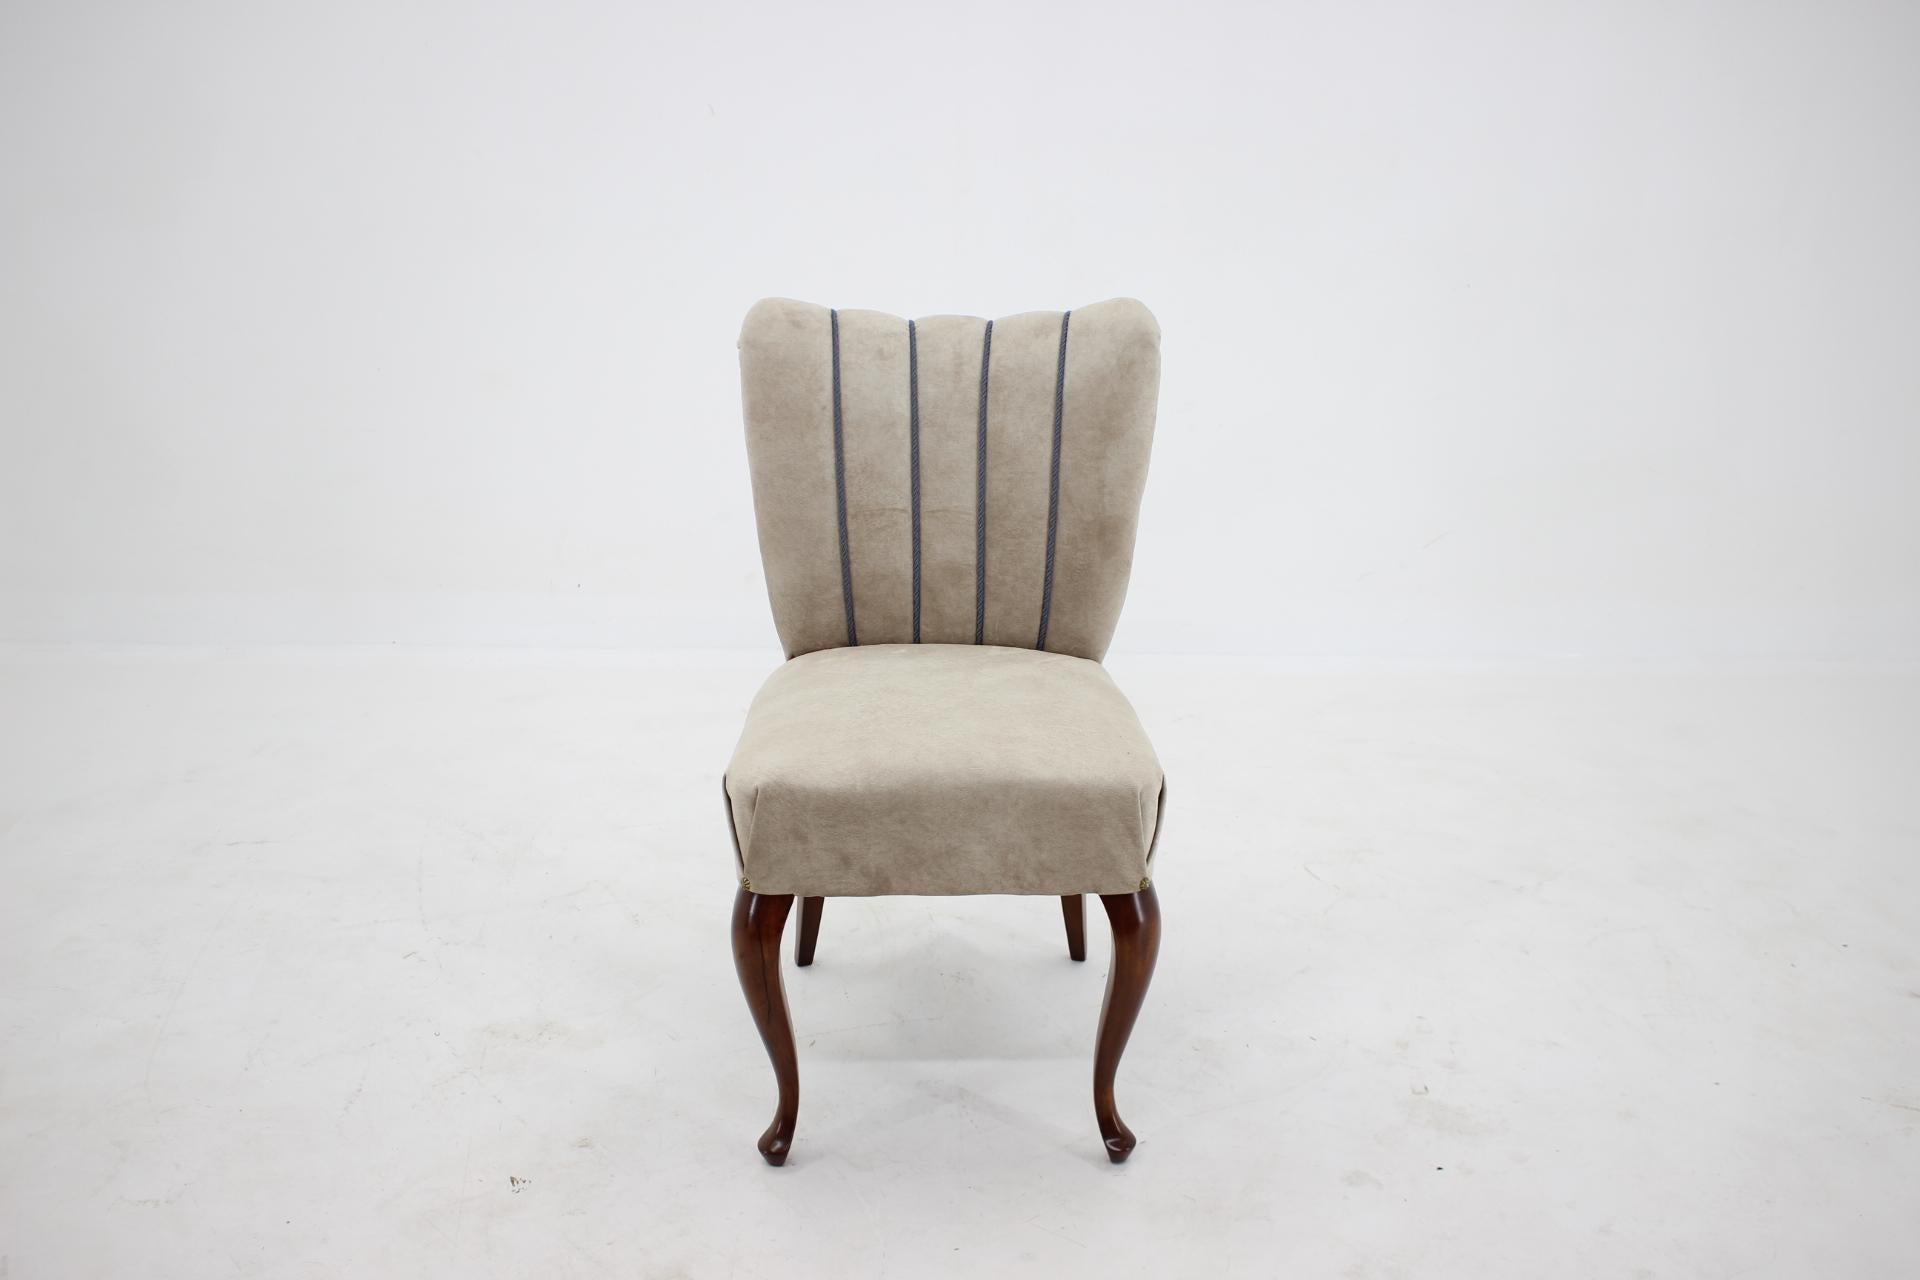 - Newly upholstered 
- The wooden legs have been repolished 
- Seat with springs
- High of seat 47 cm.